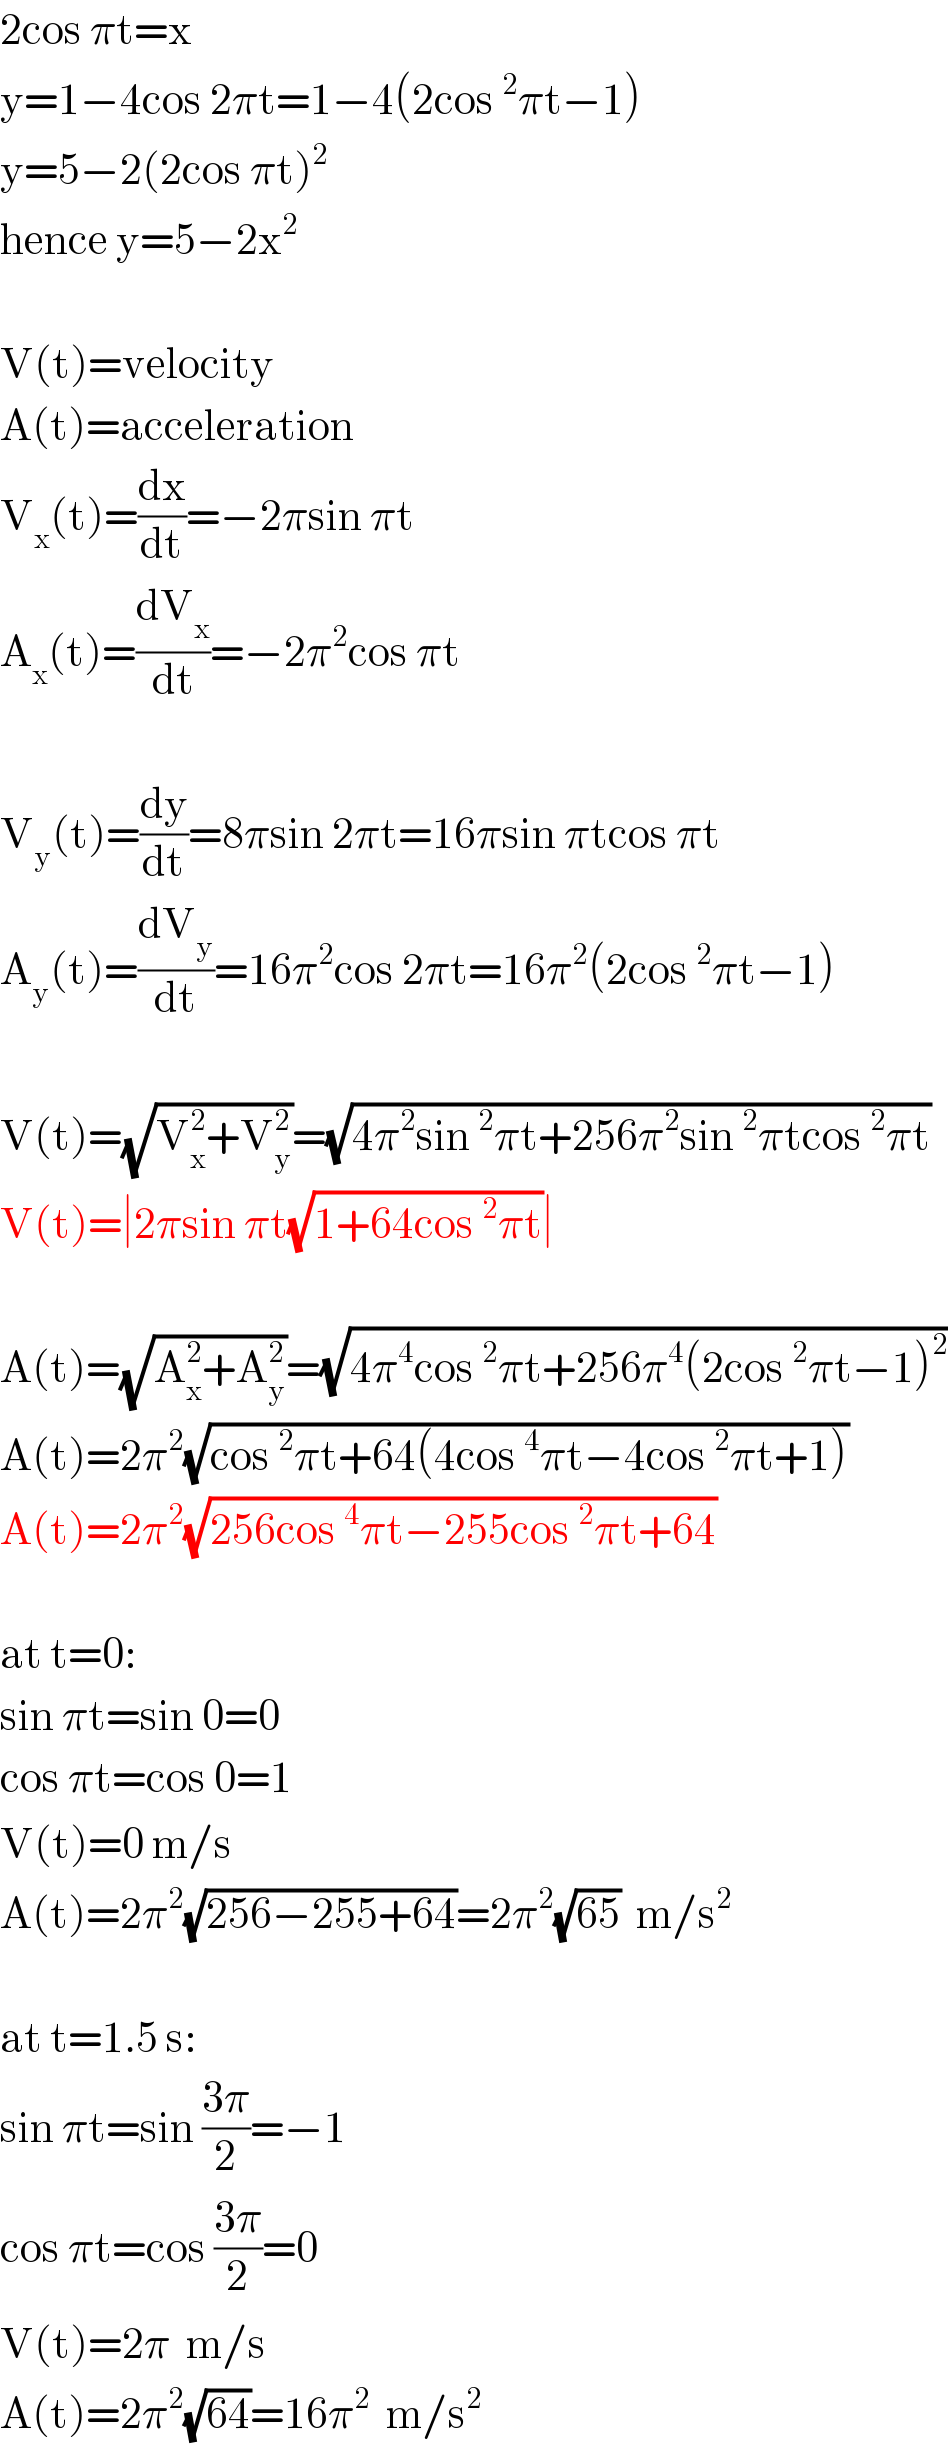 2cos πt=x  y=1−4cos 2πt=1−4(2cos^2 πt−1)  y=5−2(2cos πt)^2   hence y=5−2x^2     V(t)=velocity  A(t)=acceleration  V_x (t)=(dx/dt)=−2πsin πt  A_x (t)=(dV_x /dt)=−2π^2 cos πt    V_y (t)=(dy/dt)=8πsin 2πt=16πsin πtcos πt  A_y (t)=(dV_y /dt)=16π^2 cos 2πt=16π^2 (2cos^2 πt−1)    V(t)=(√(V_x ^2 +V_y ^2 ))=(√(4π^2 sin^2 πt+256π^2 sin^2 πtcos^2 πt))  V(t)=∣2πsin πt(√(1+64cos^2 πt))∣    A(t)=(√(A_x ^2 +A_y ^2 ))=(√(4π^4 cos^2 πt+256π^4 (2cos^2 πt−1)^2 ))  A(t)=2π^2 (√(cos^2 πt+64(4cos^4 πt−4cos^2 πt+1)))  A(t)=2π^2 (√(256cos^4 πt−255cos^2 πt+64))    at t=0:  sin πt=sin 0=0  cos πt=cos 0=1  V(t)=0 m/s  A(t)=2π^2 (√(256−255+64))=2π^2 (√(65))  m/s^2     at t=1.5 s:  sin πt=sin ((3π)/2)=−1  cos πt=cos ((3π)/2)=0  V(t)=2π  m/s  A(t)=2π^2 (√(64))=16π^2   m/s^2   